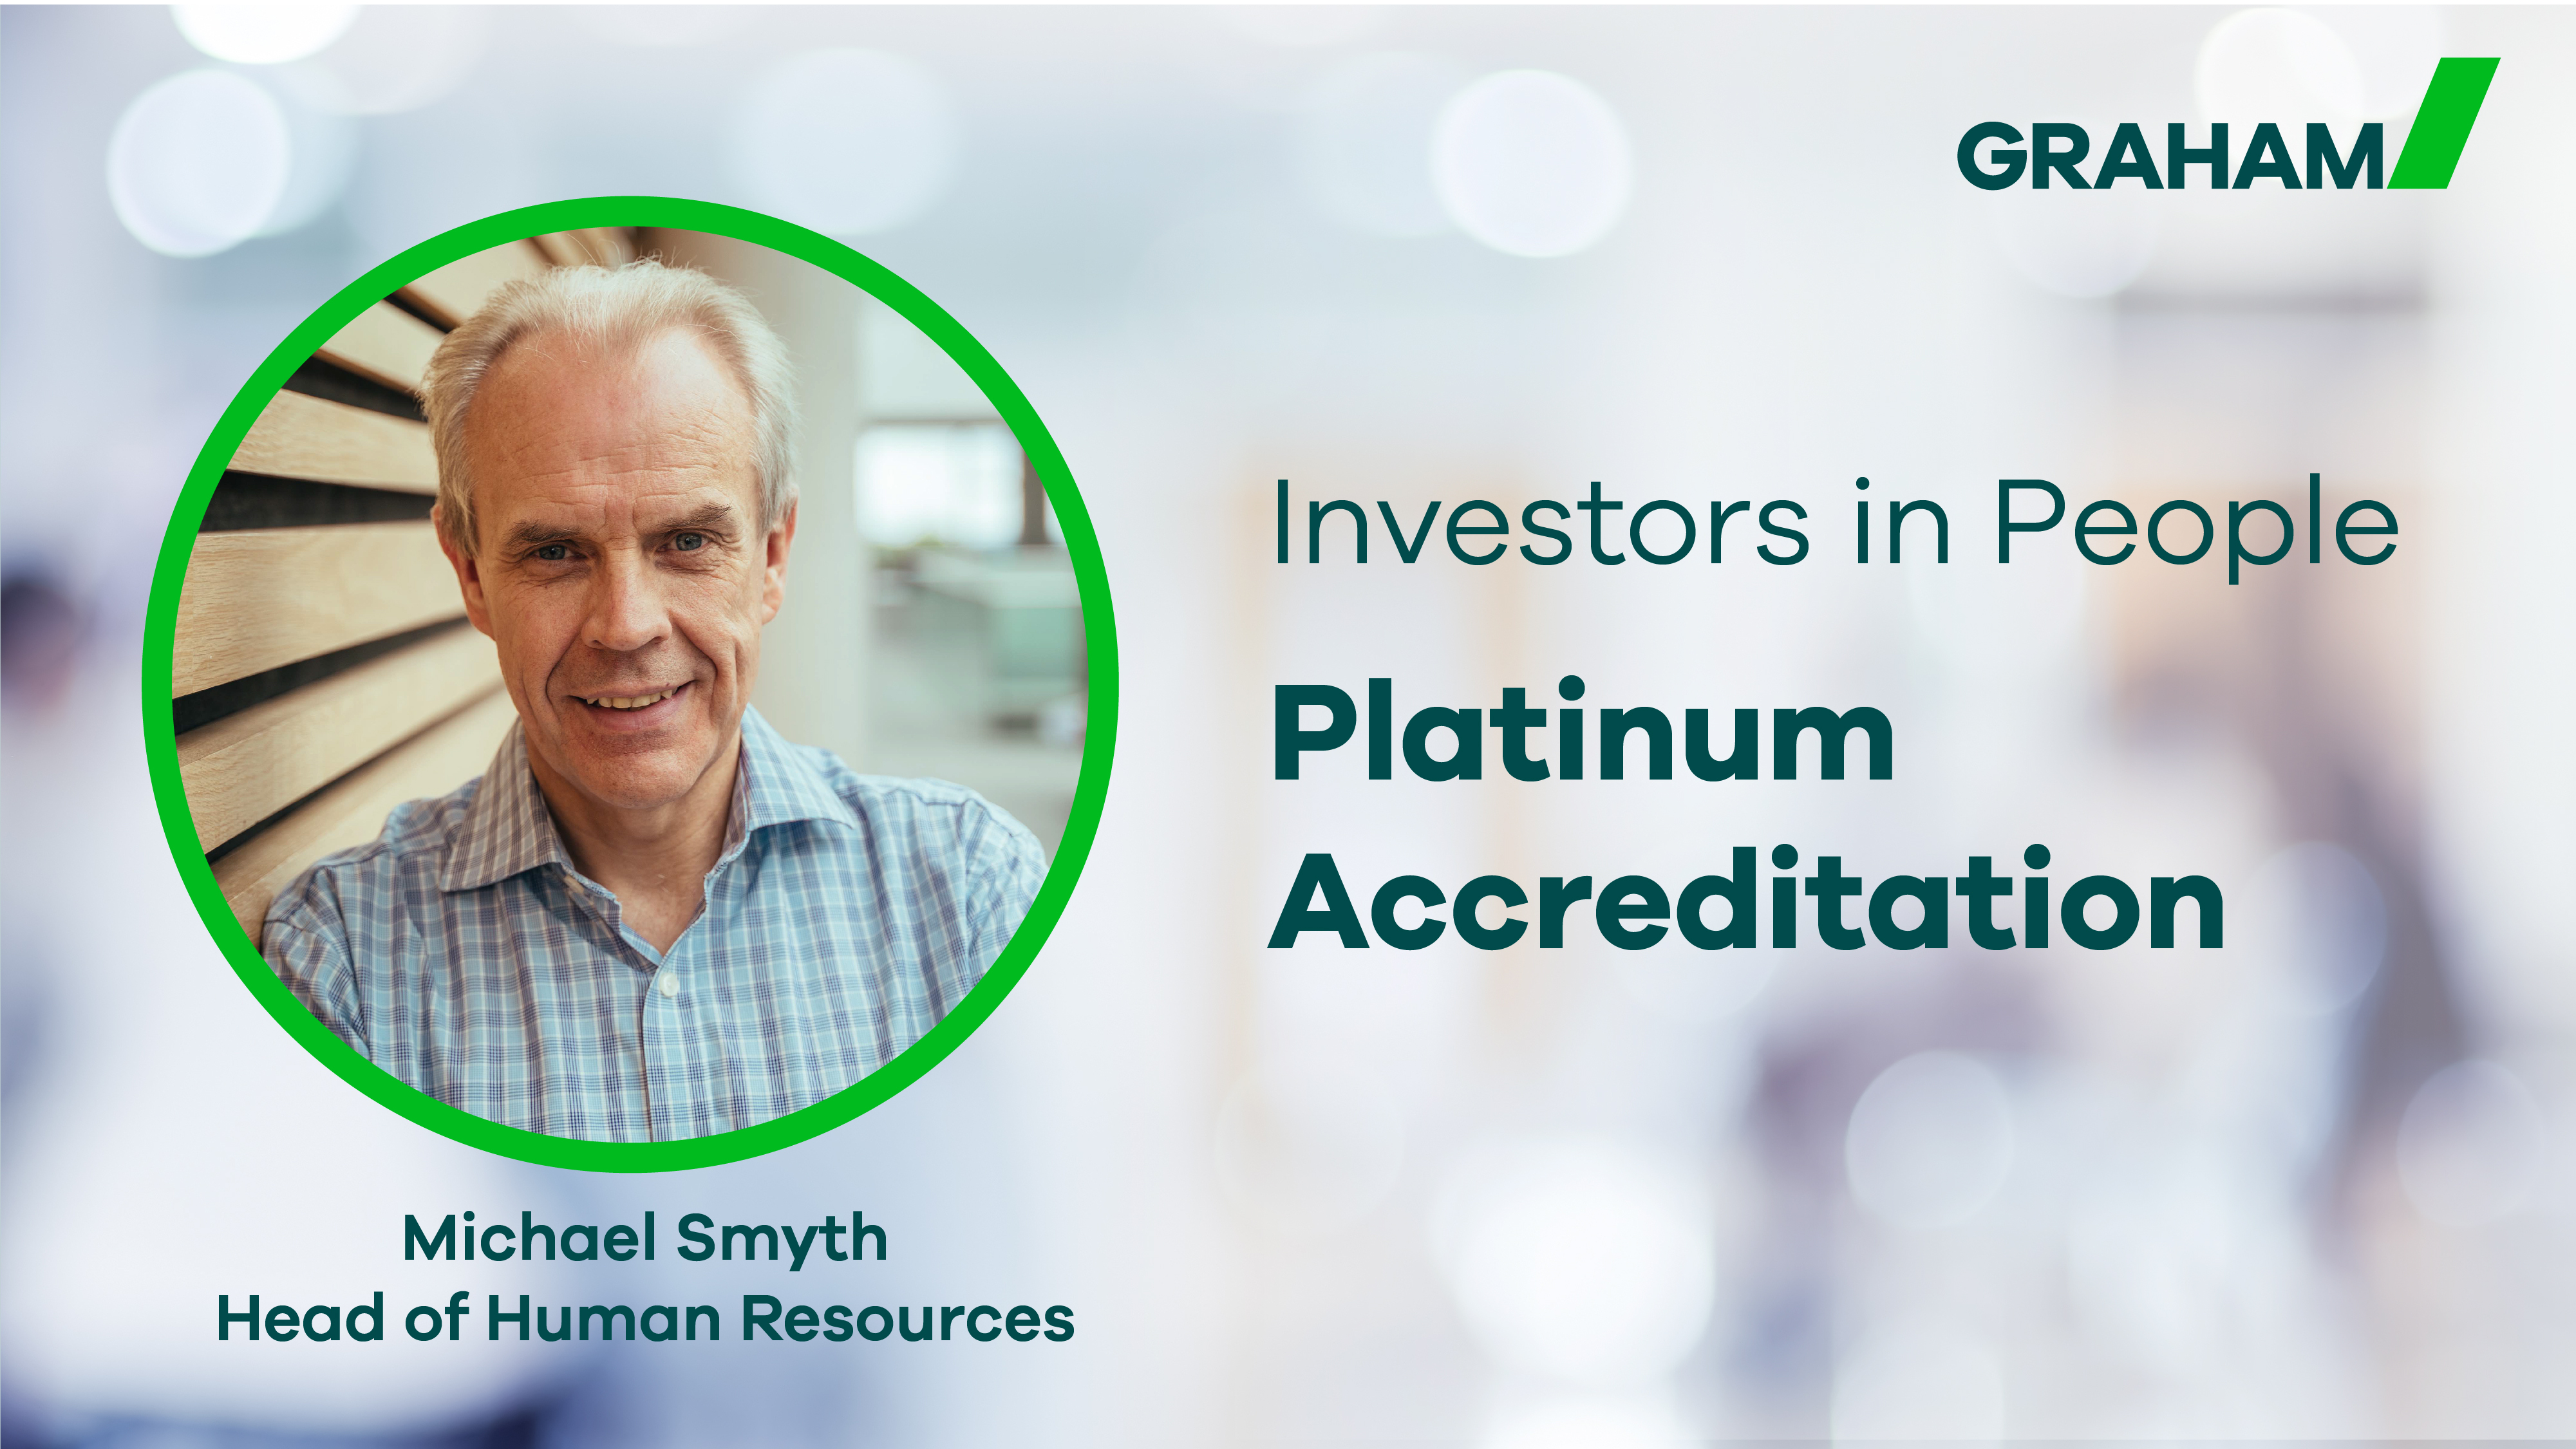 GRAHAM maintains Investors in People 'We Invest In People' Platinum Accreditation image